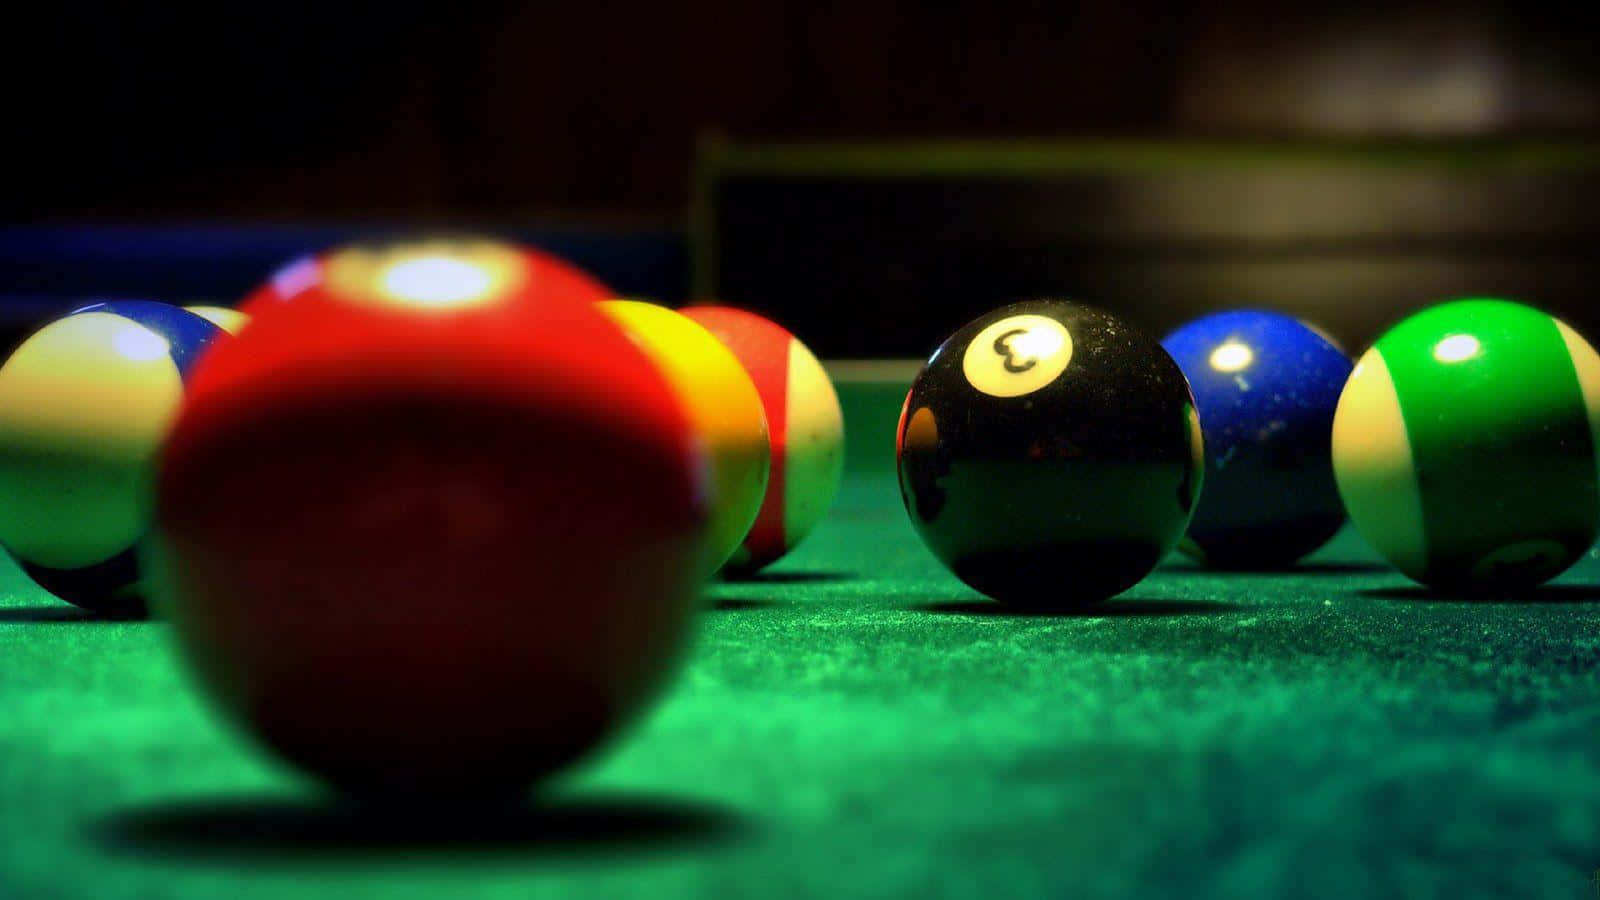 4000 8 Ball Pool Stock Photos Pictures  RoyaltyFree Images  iStock  8  ball pool tournament